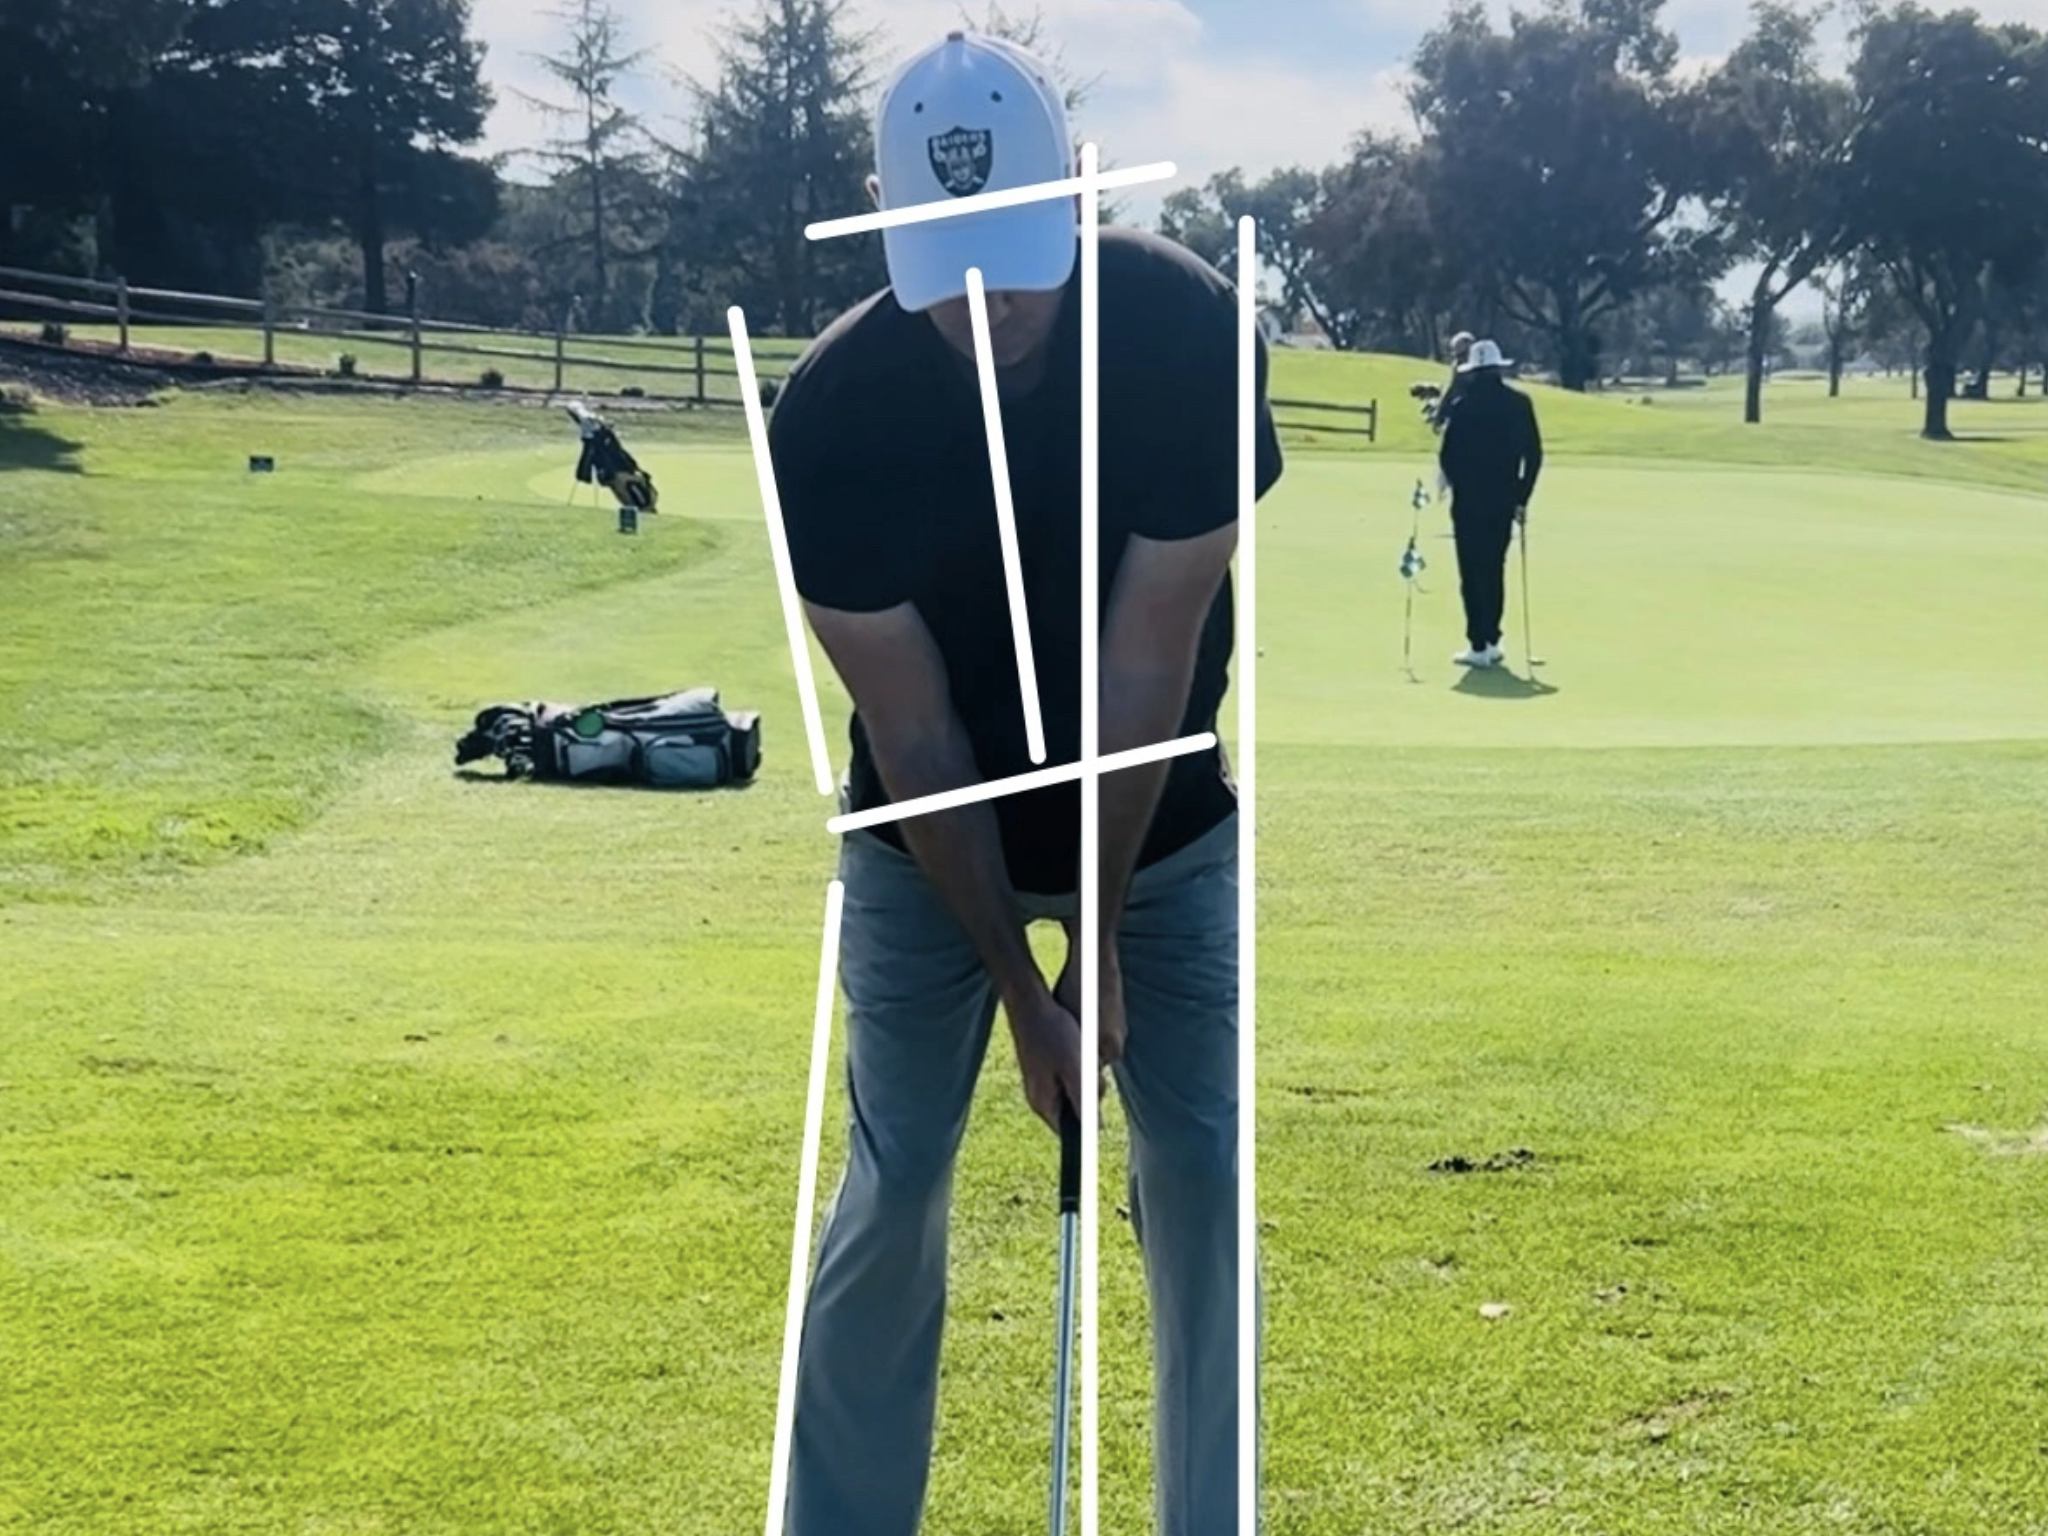 How To Safely Post Up On Lead Side For MAX Golf Swing Speed 